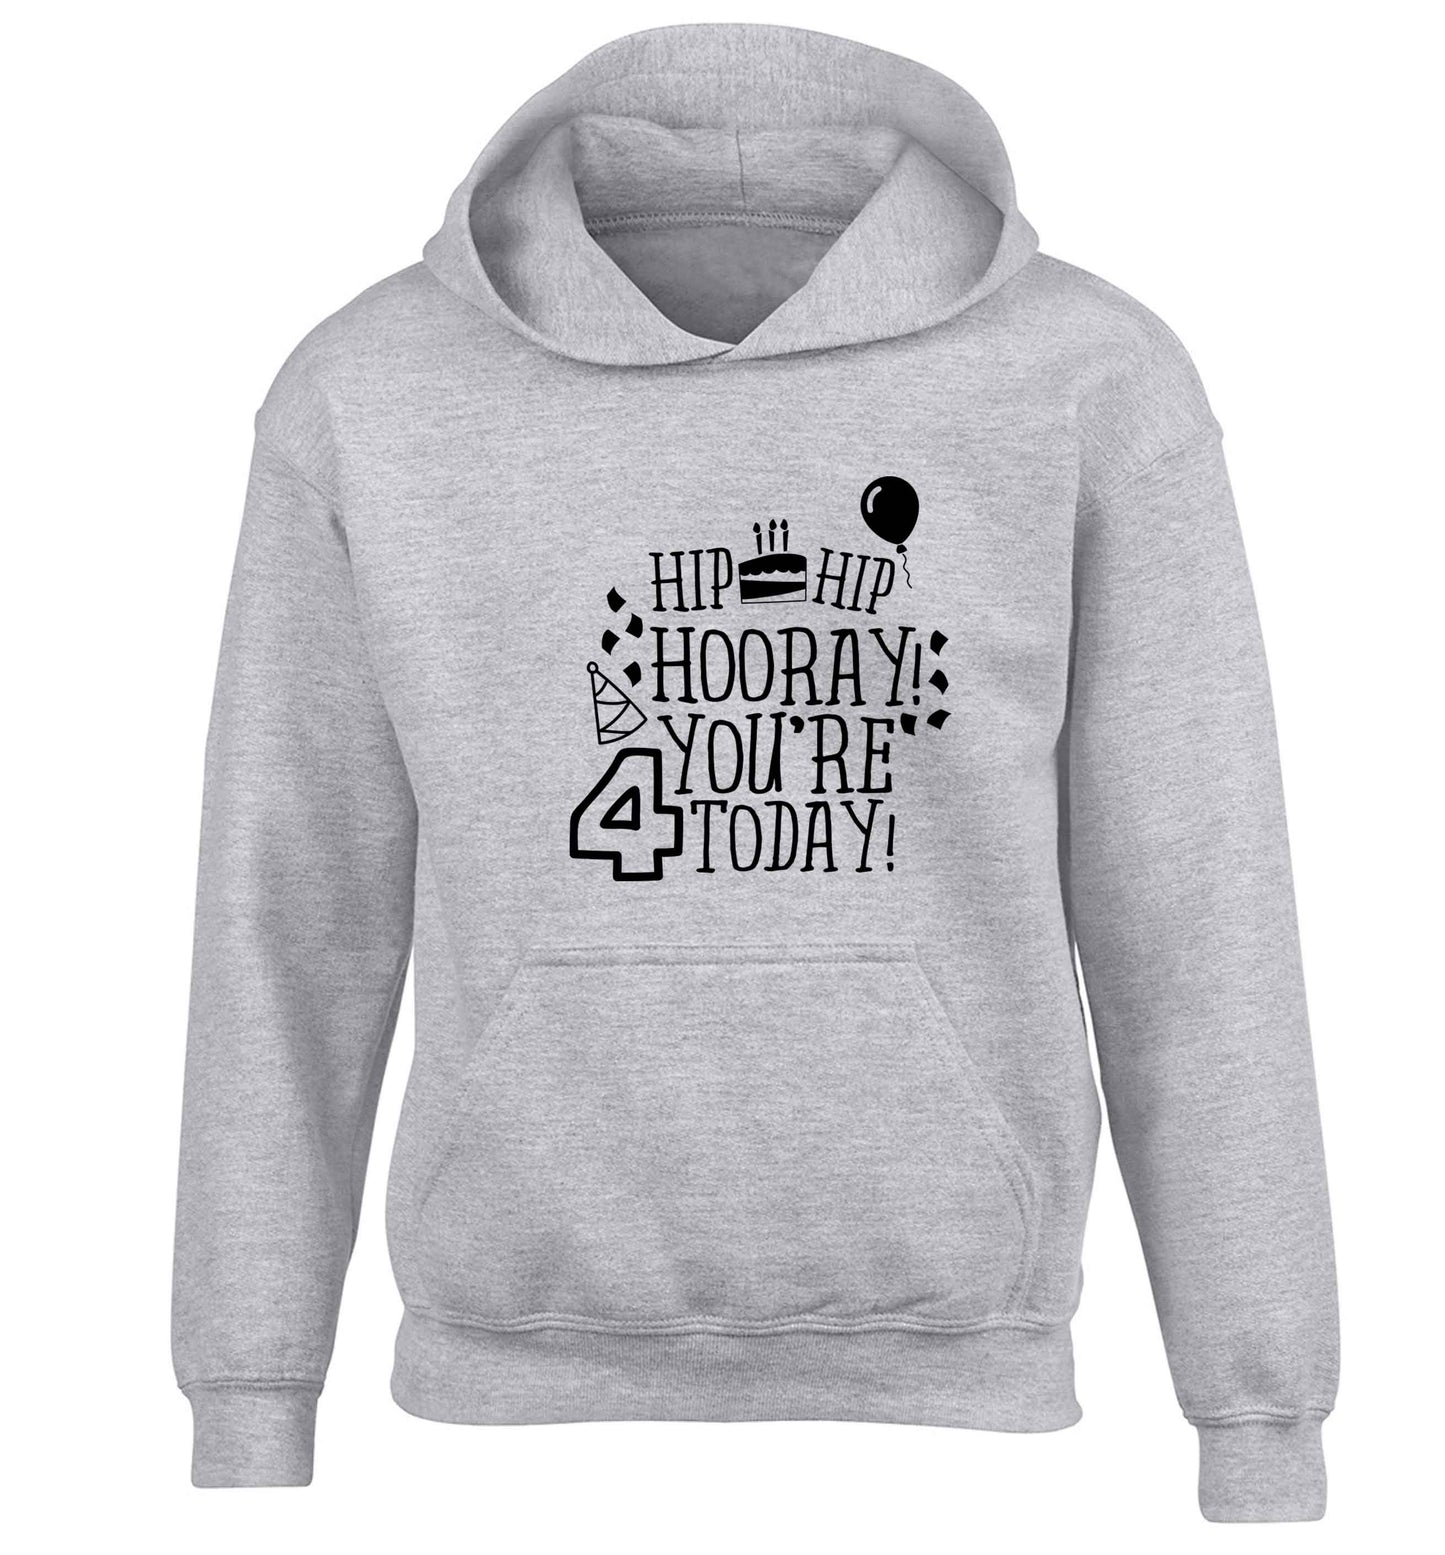 Hip hip hooray you're four today!children's grey hoodie 12-13 Years